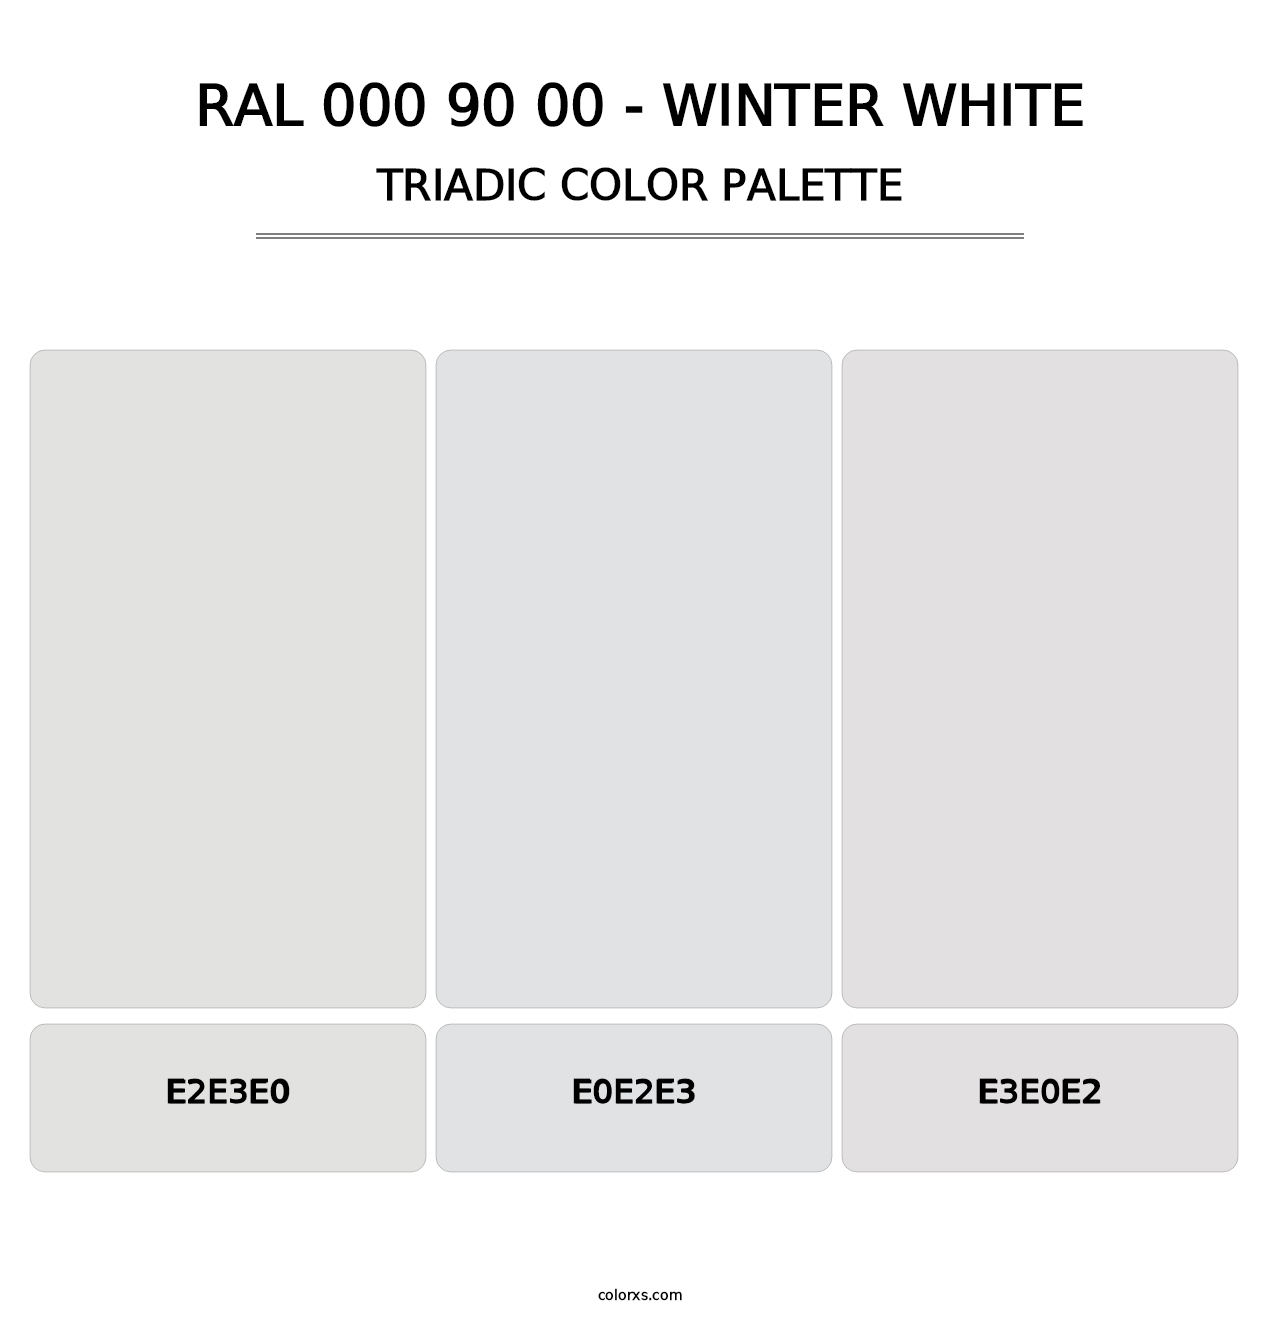 RAL 000 90 00 - Winter White - Triadic Color Palette